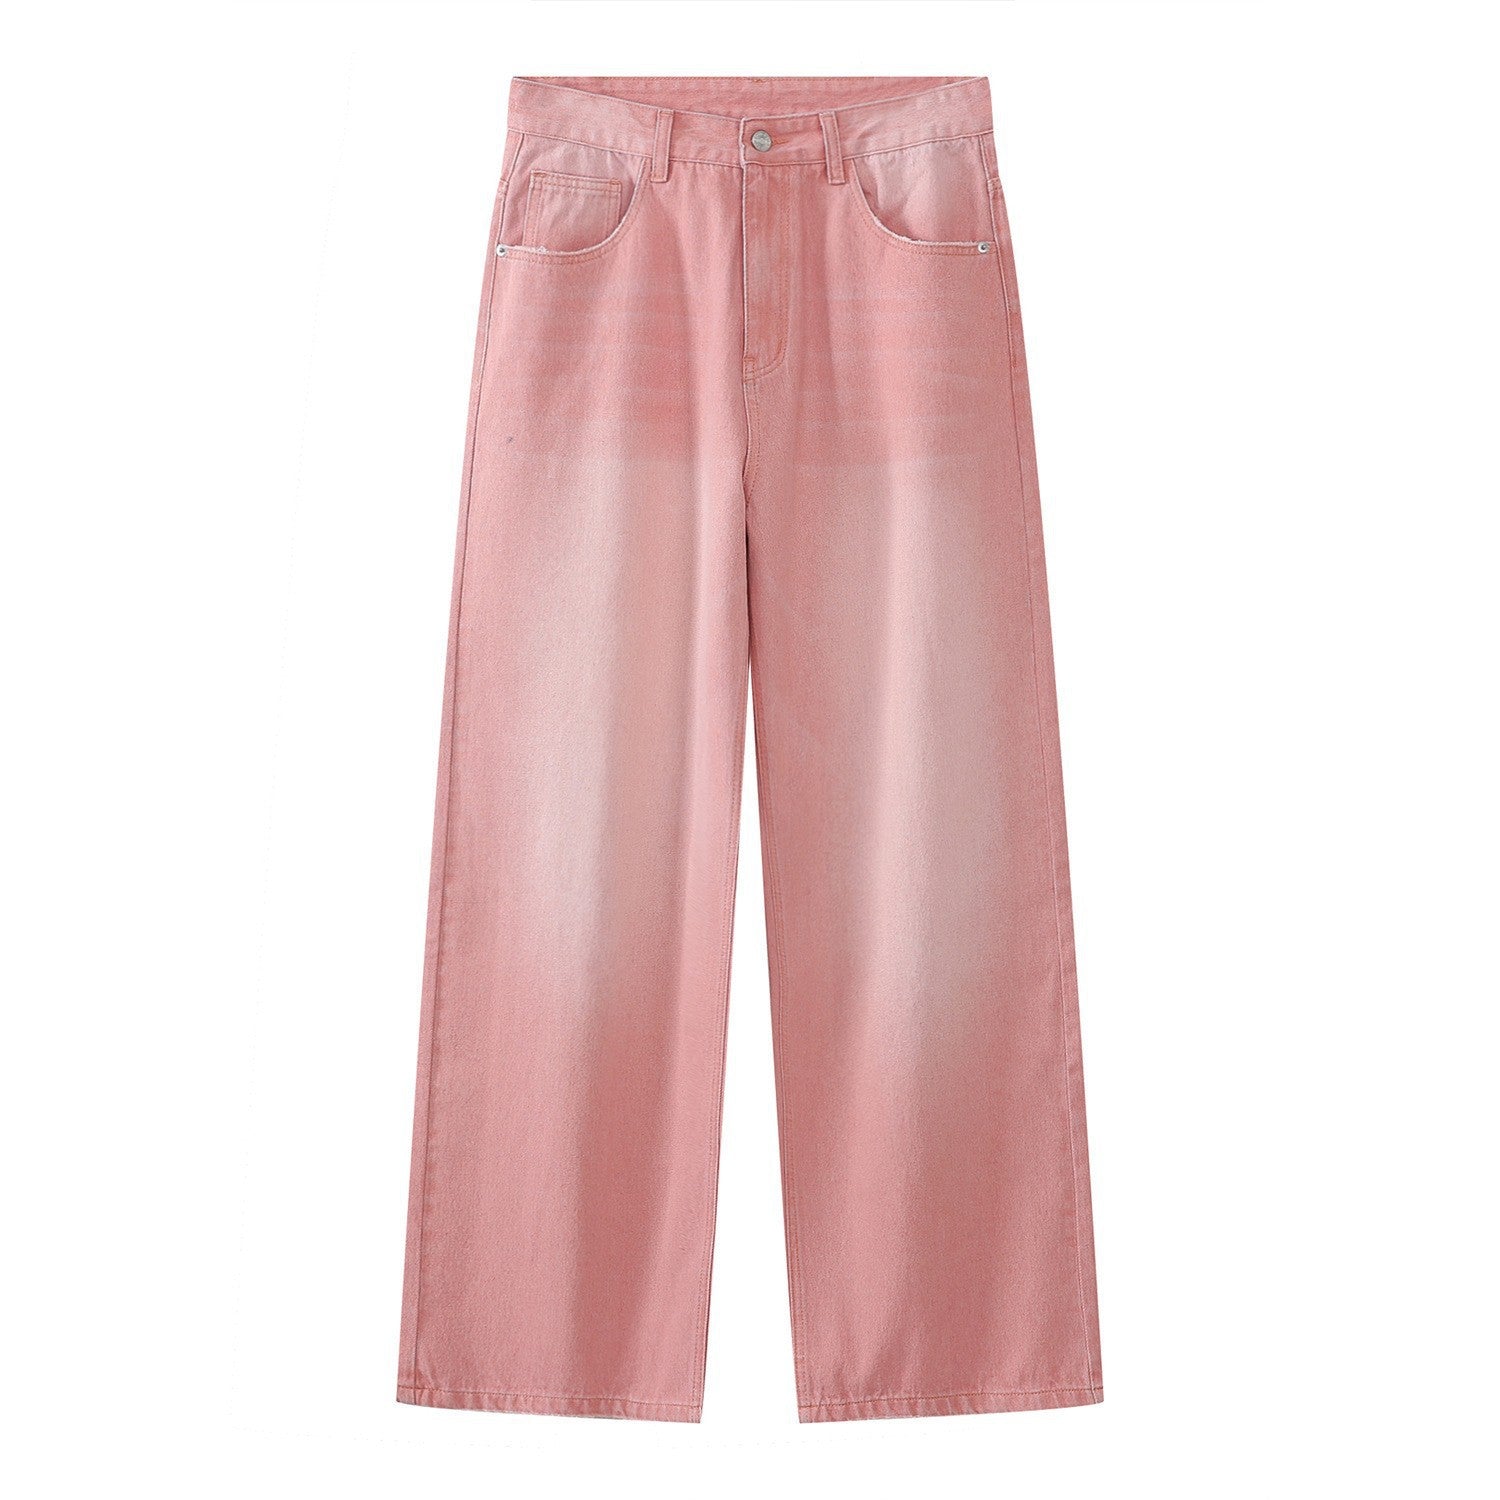 Retro Colored Wide Pants for Women